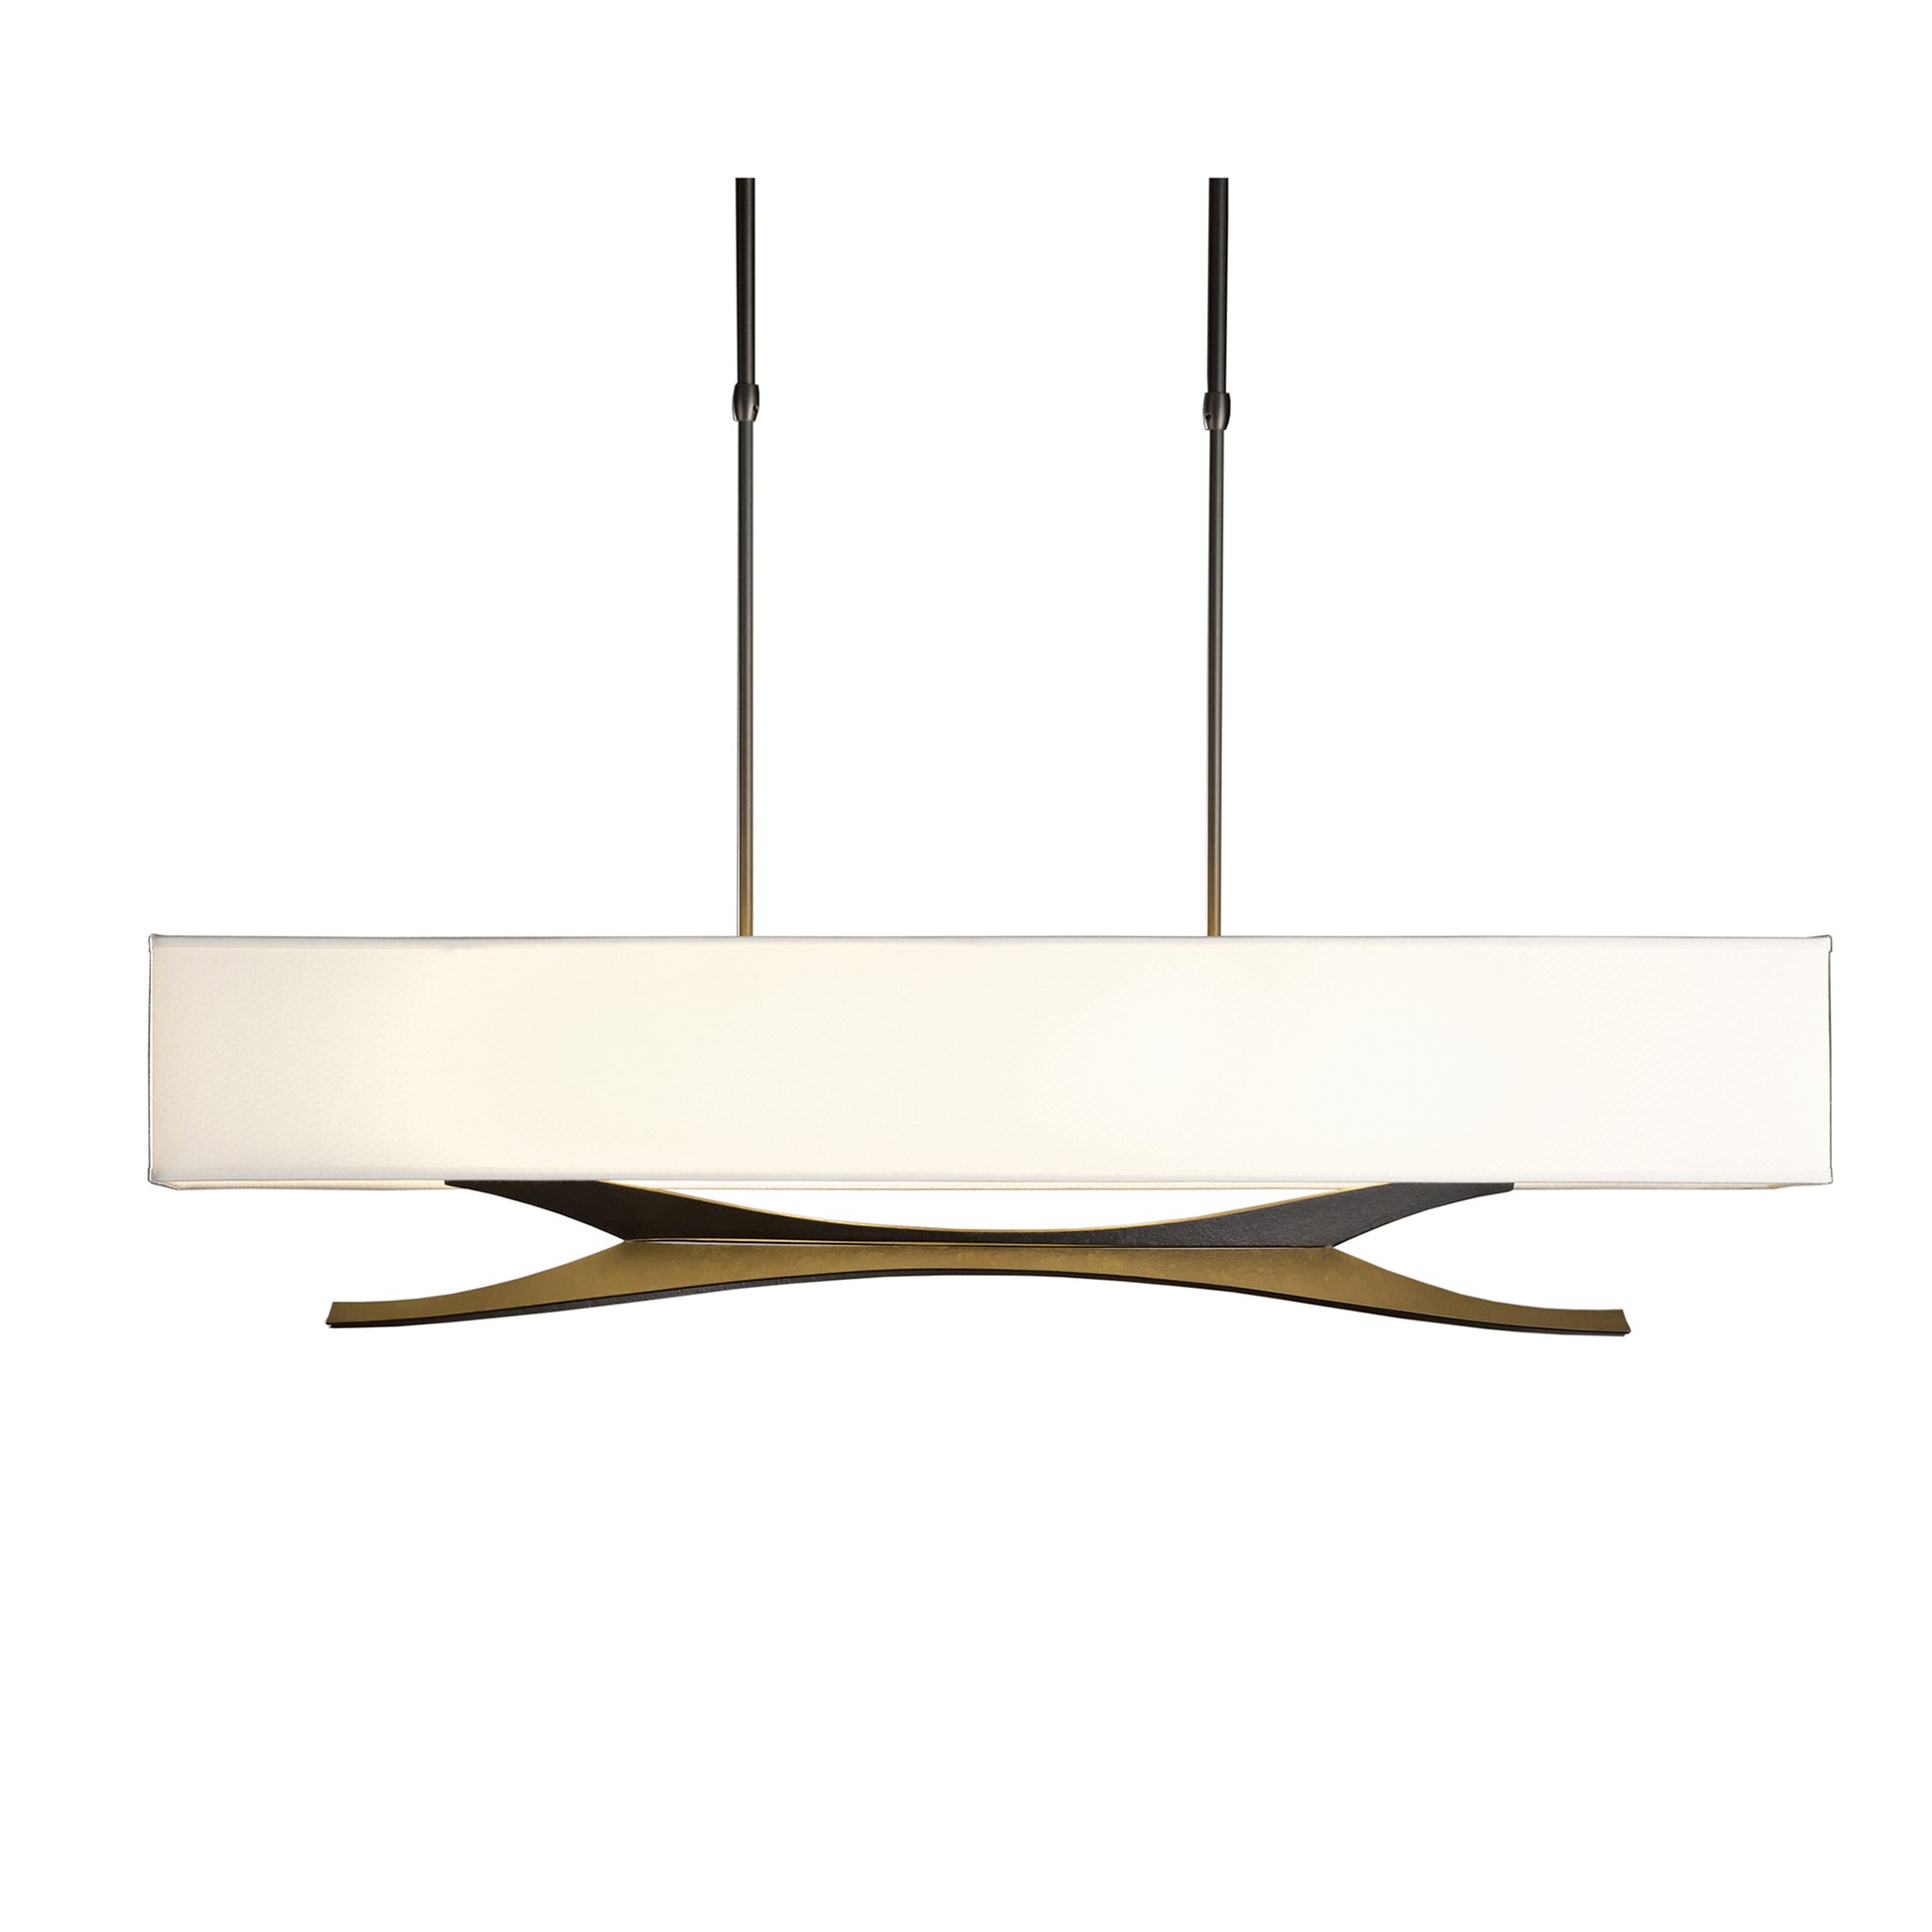 A modern Hubbardton Forge Moreau Pendant light fixture with a sleek, horizontal white shade, suspended by two thin cables, featuring an elegant, curved metallic accent below the shade.